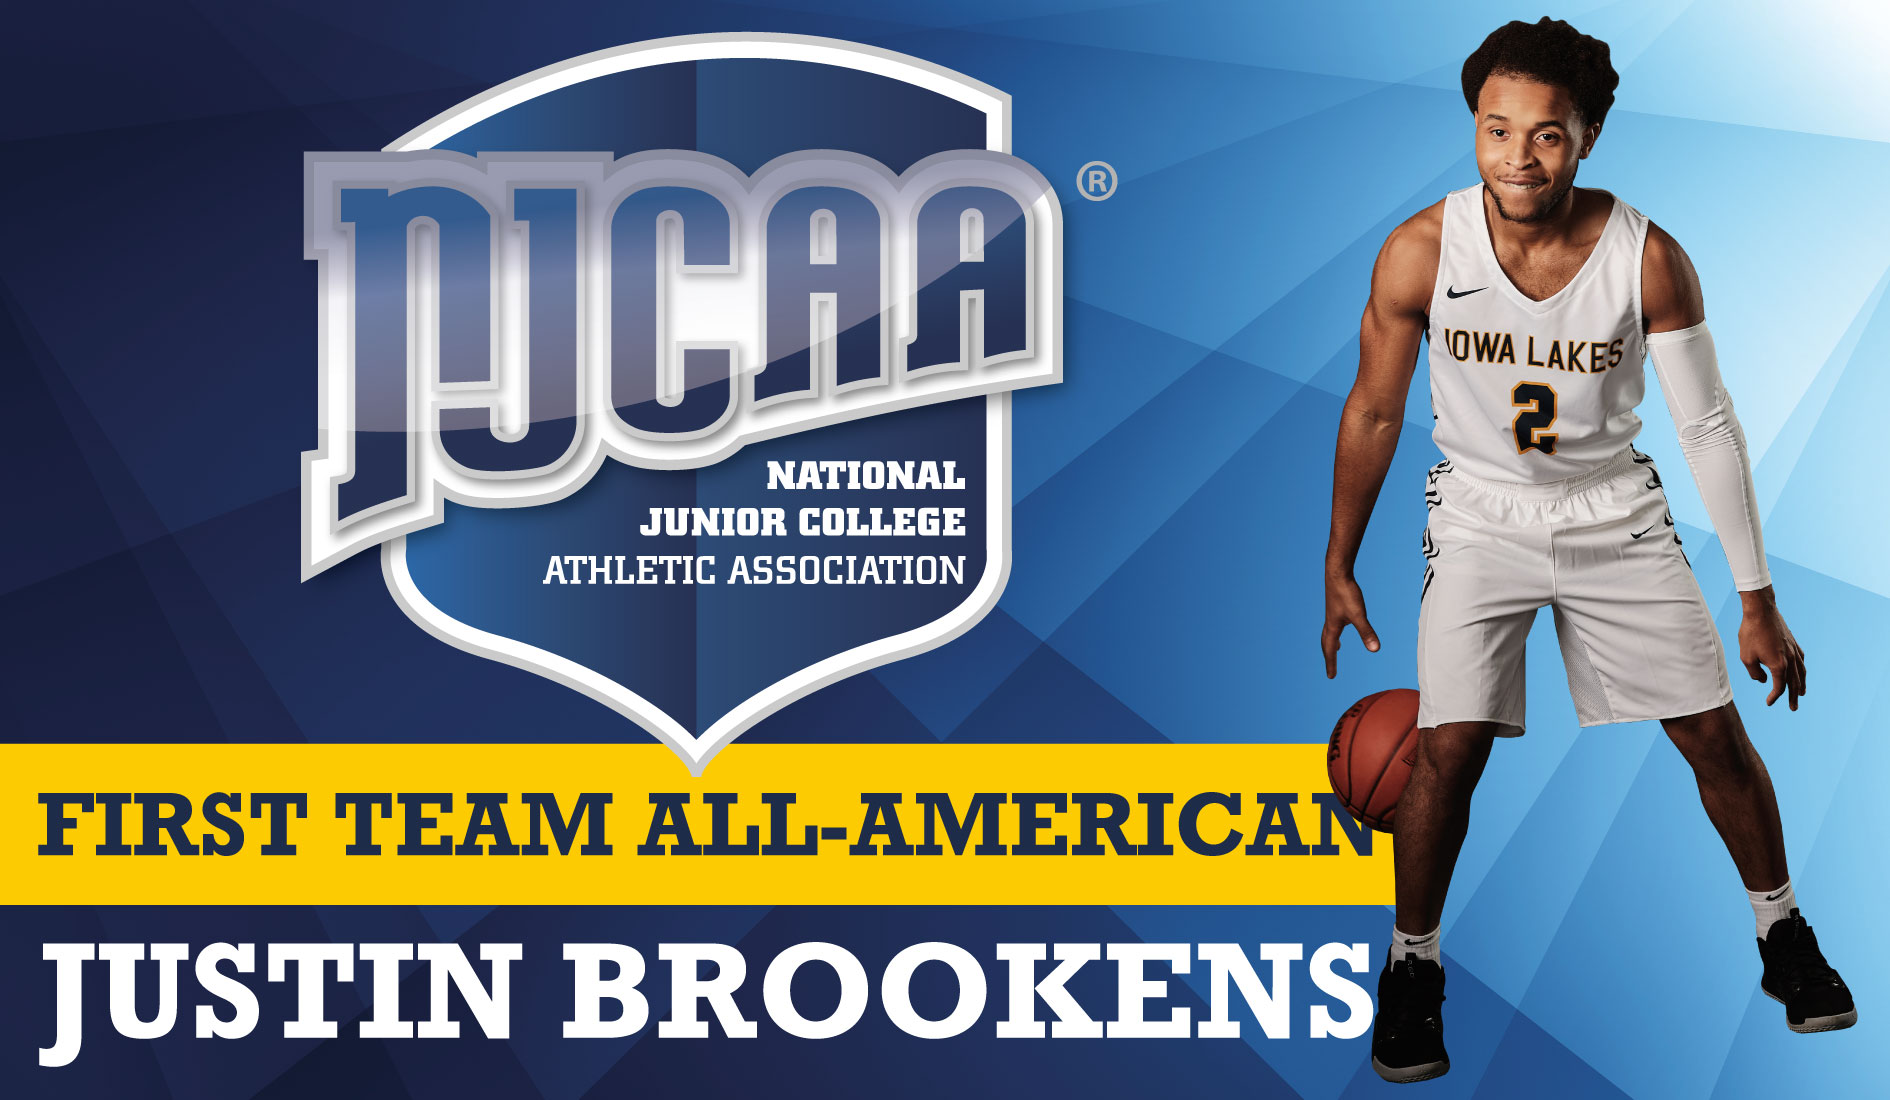 Iowa Lakes Men's Basketball Player Justin Brookens Earns 1st Team All-American Honors